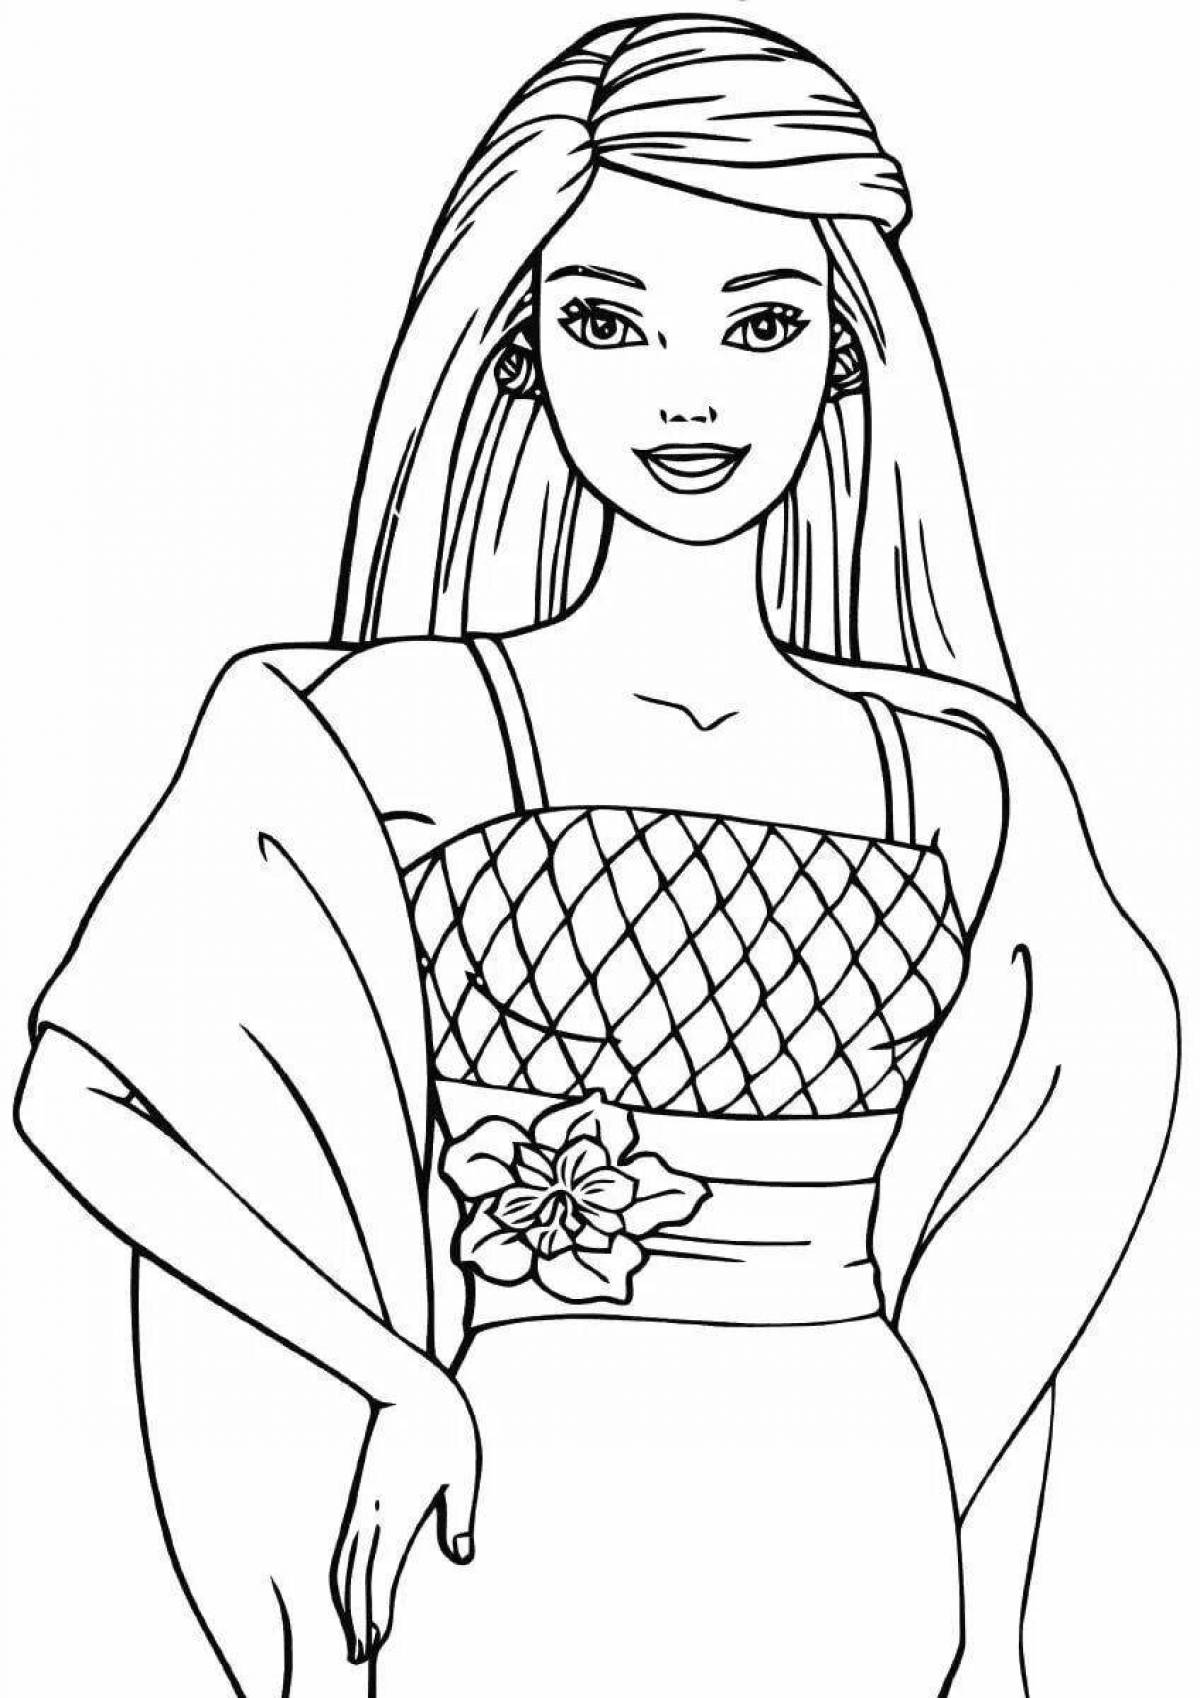 Elegant coloring book for girls is the best in the world